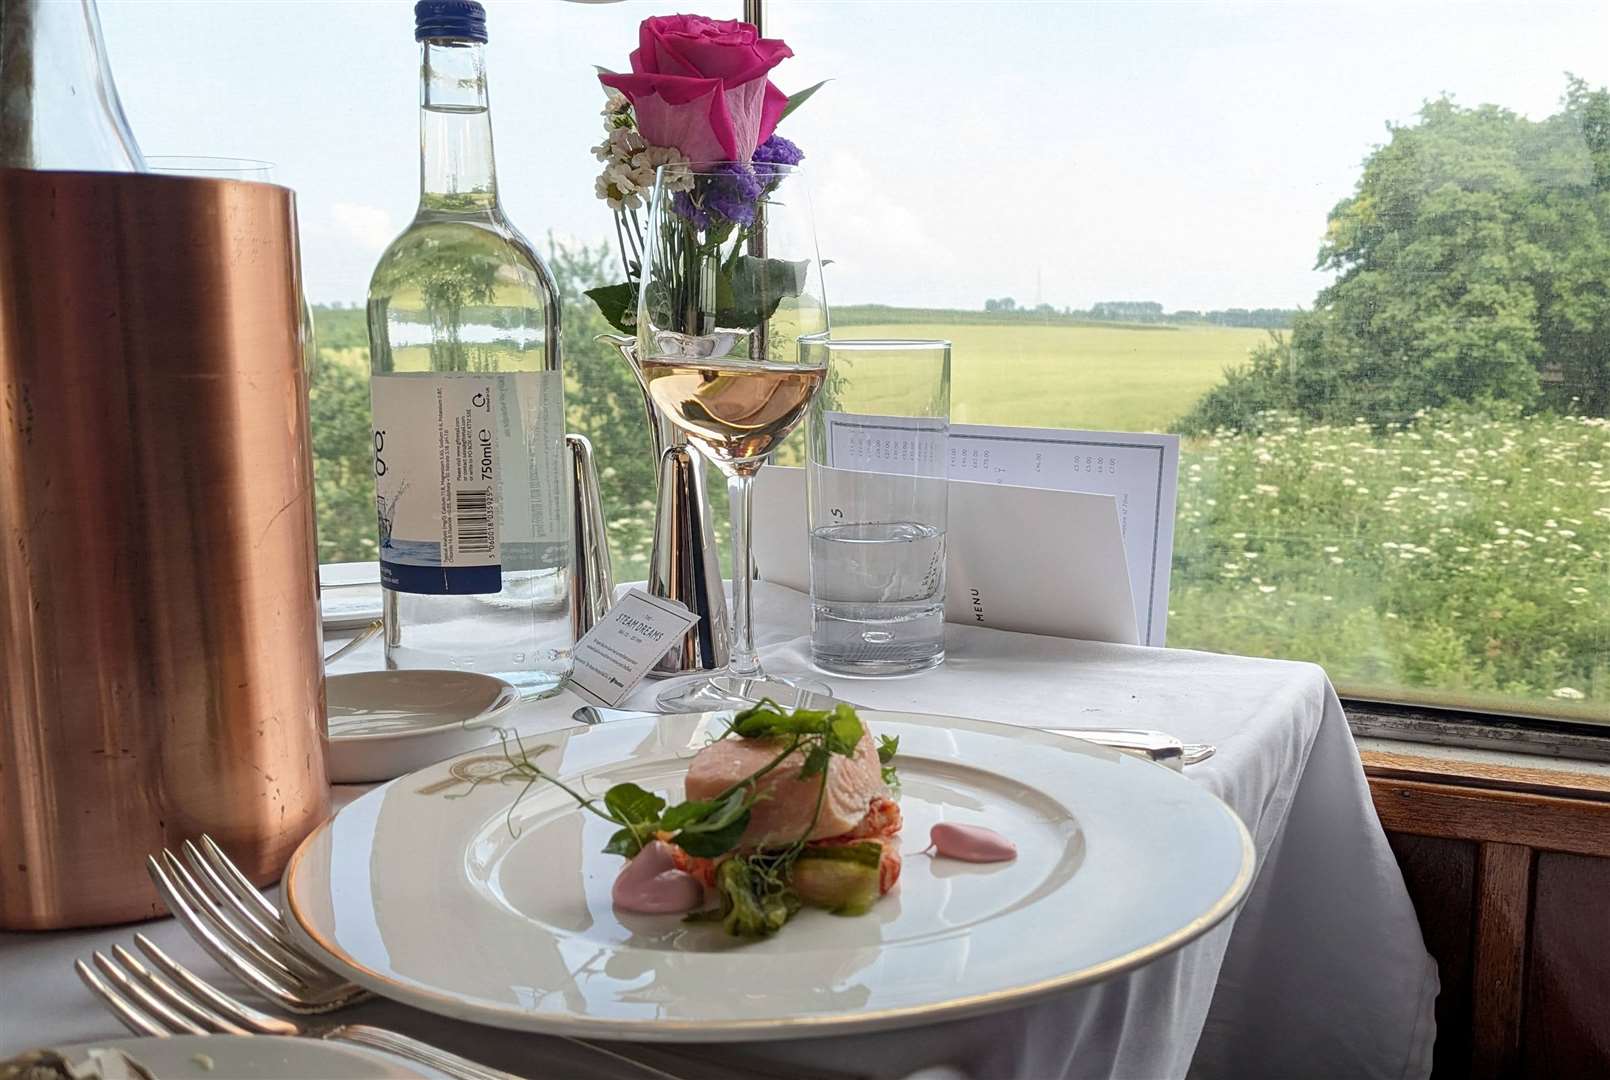 A starter of poached trout served with a view of the Kent countryside